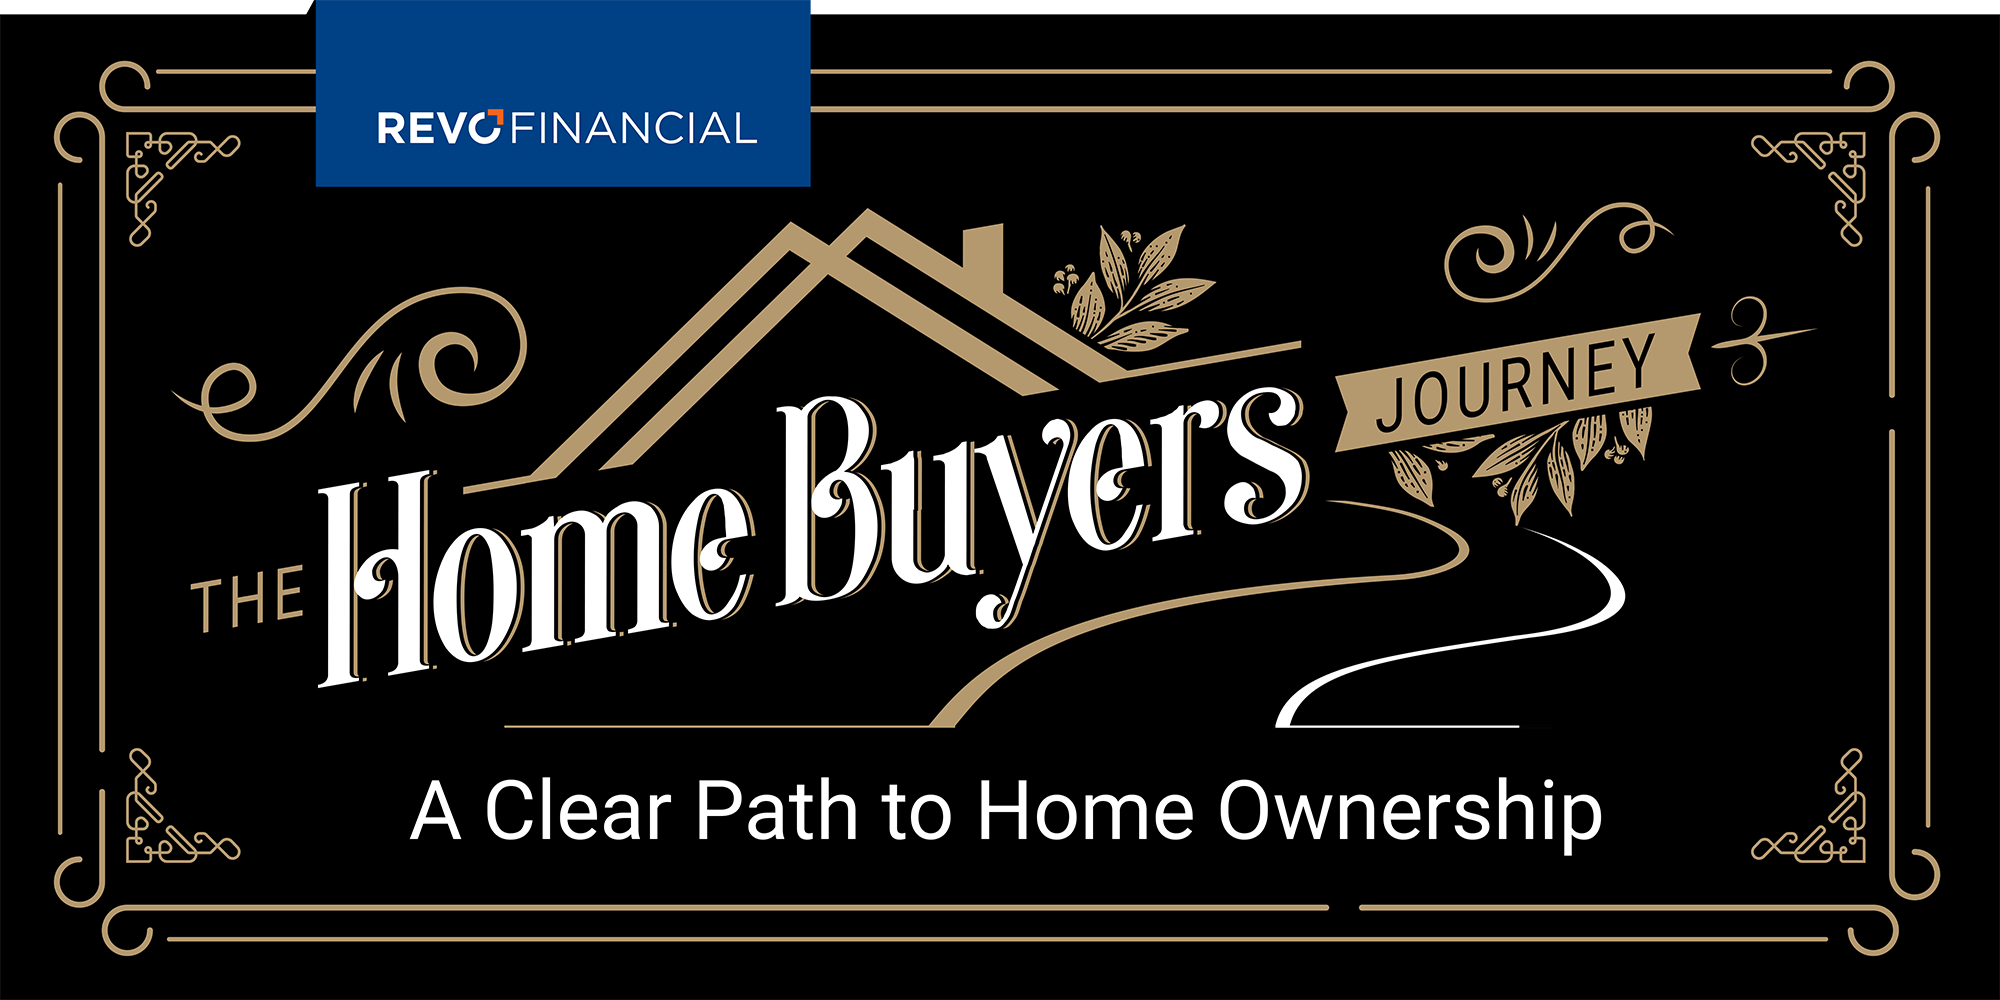 The Home Buyers Journey - A clear path to home ownership